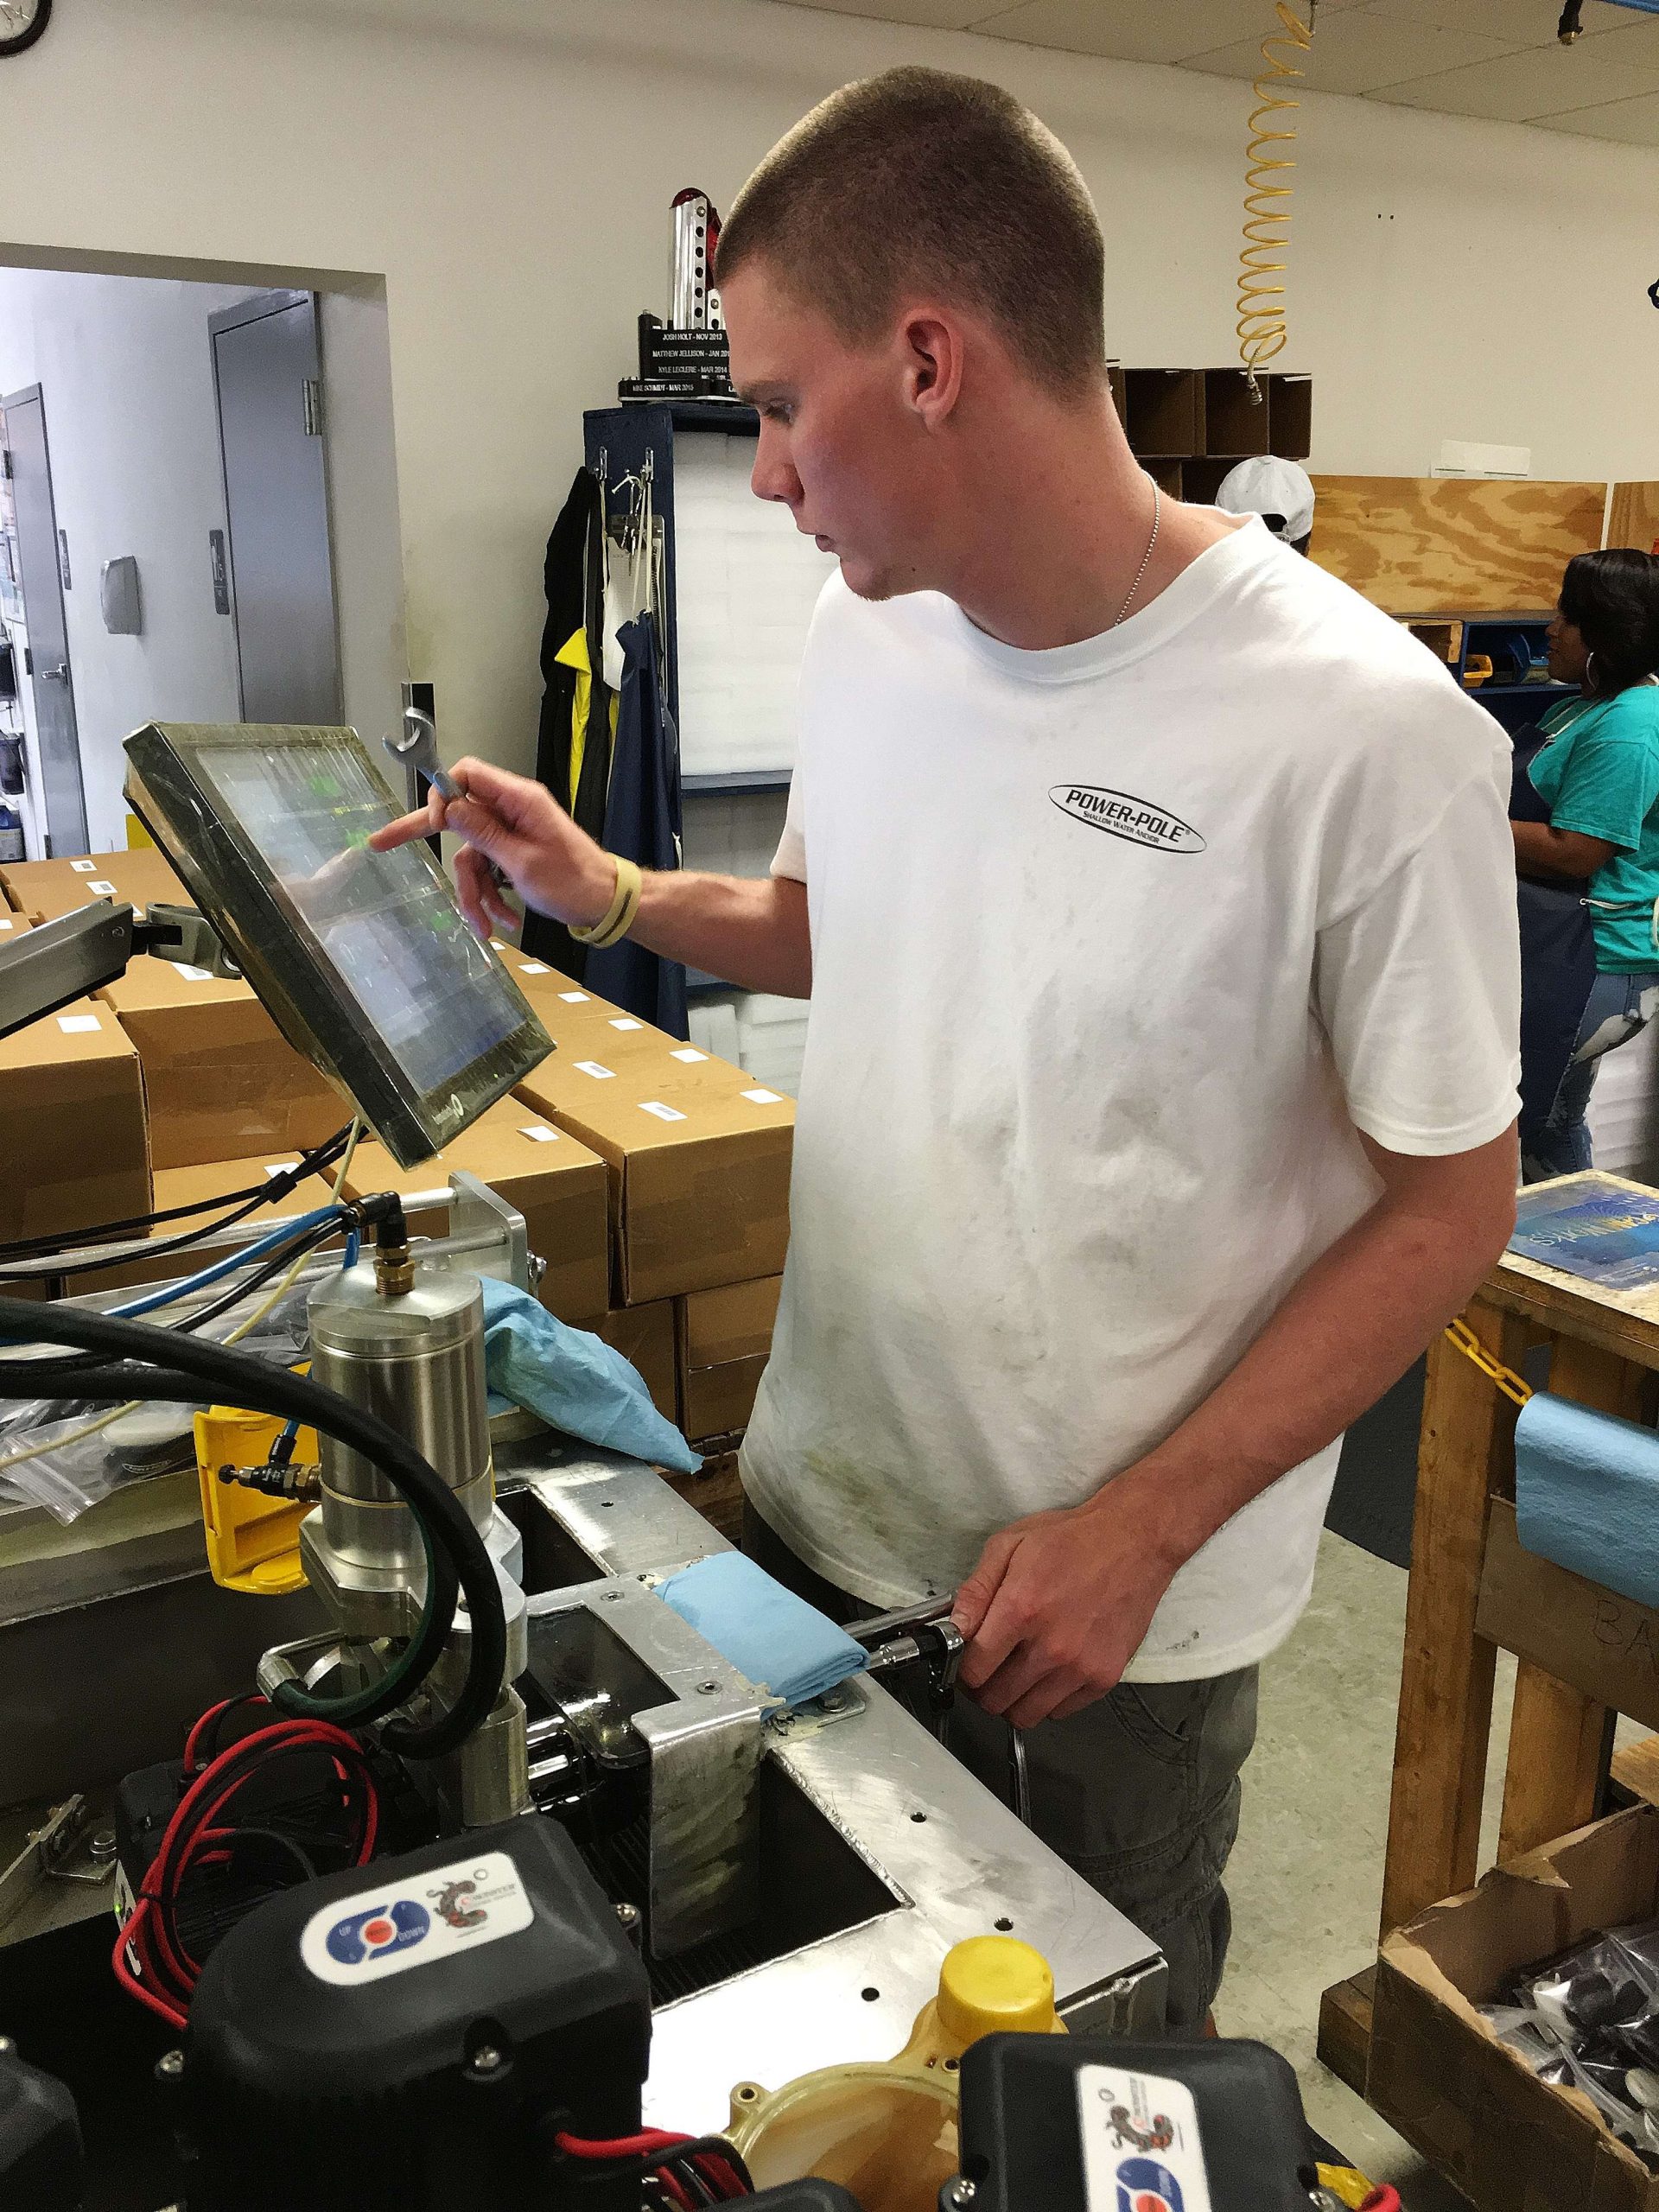 While some components are receiving paint, others enter testing and assembly. Here a technician makes sure the pumps adhere to the companyâs performance standards.